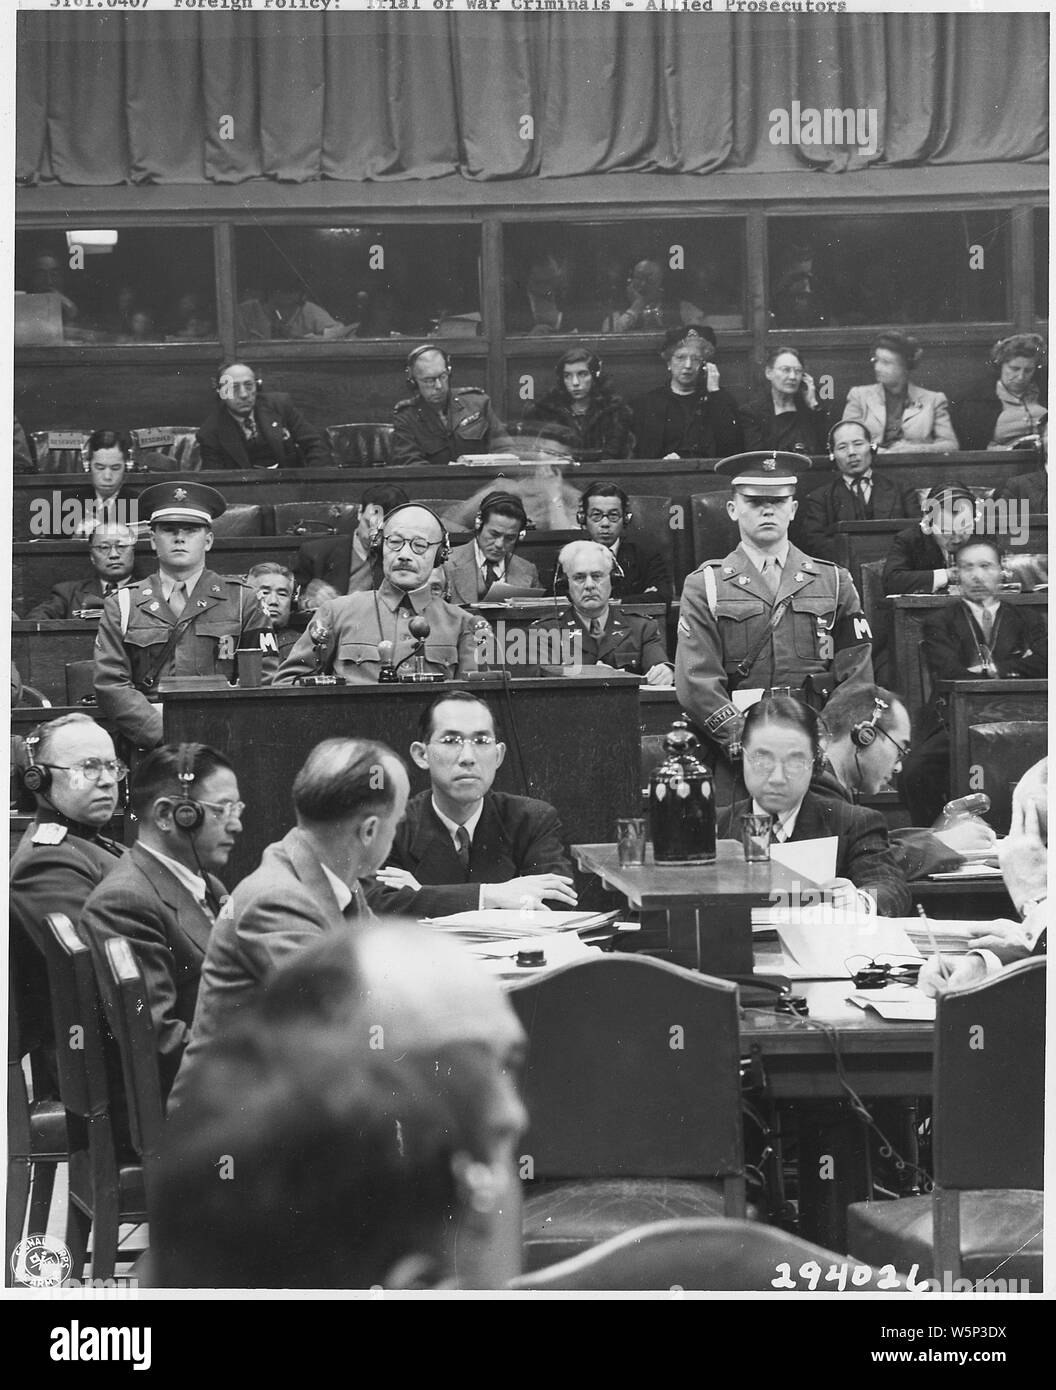 Japanese War Crimes Trials. Manila; Scope and content:  TOJO TAKES THE STAND. - Hideki Tojo, former Japanese General Premier and War Minister, from December 2, 1941 to July 1944, takes the stand for the first time during the International Tribunal trials, Tokyo, Japan. He is testifying in his own behalf during the defense phase of the trials. Tojo is surrounded by the Tribunal's staff. Stock Photo